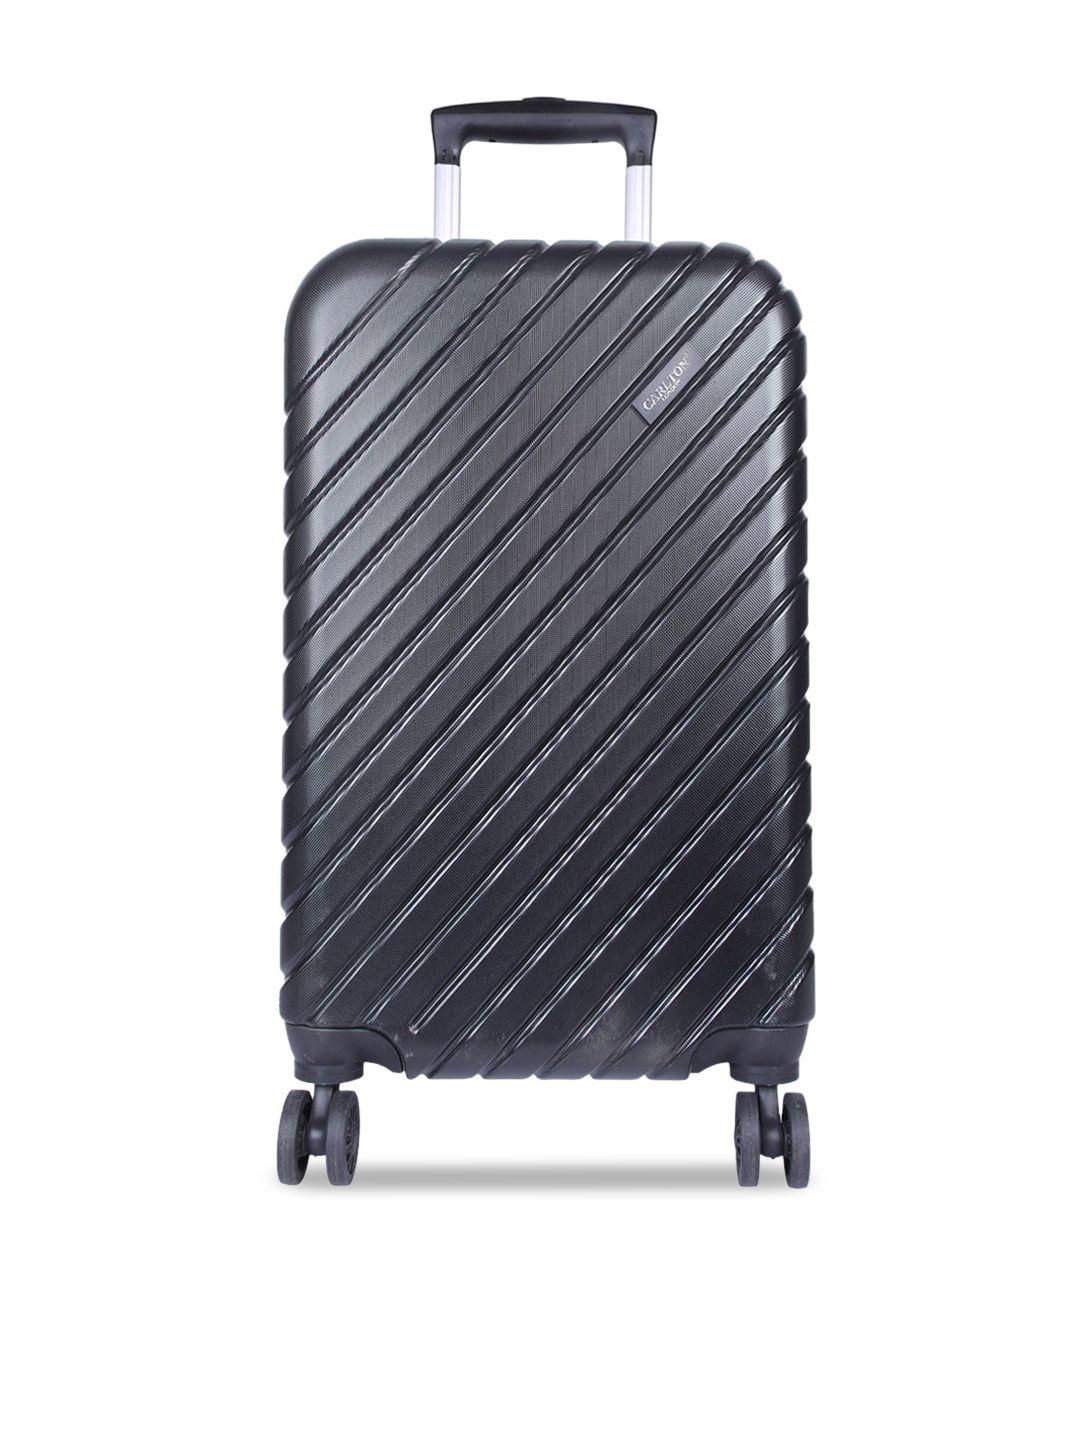 carlton-london-textured-hard-sided-small-trolley-suitcase